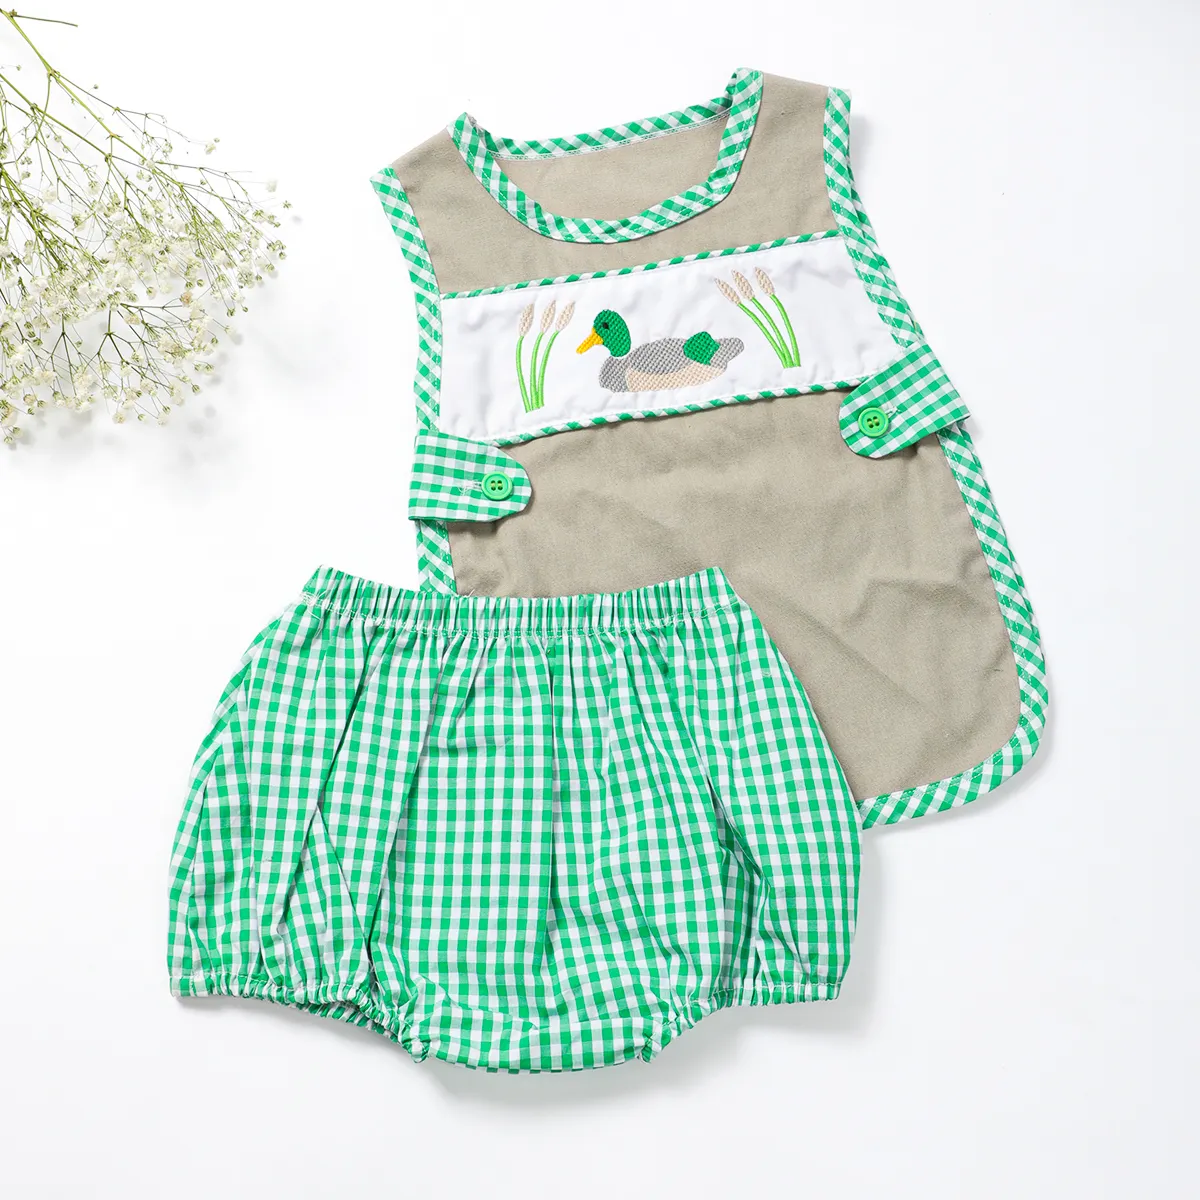 Puresun新着子供服夏のツーピースセットハンティングダック刺Embroidery男の子服セット